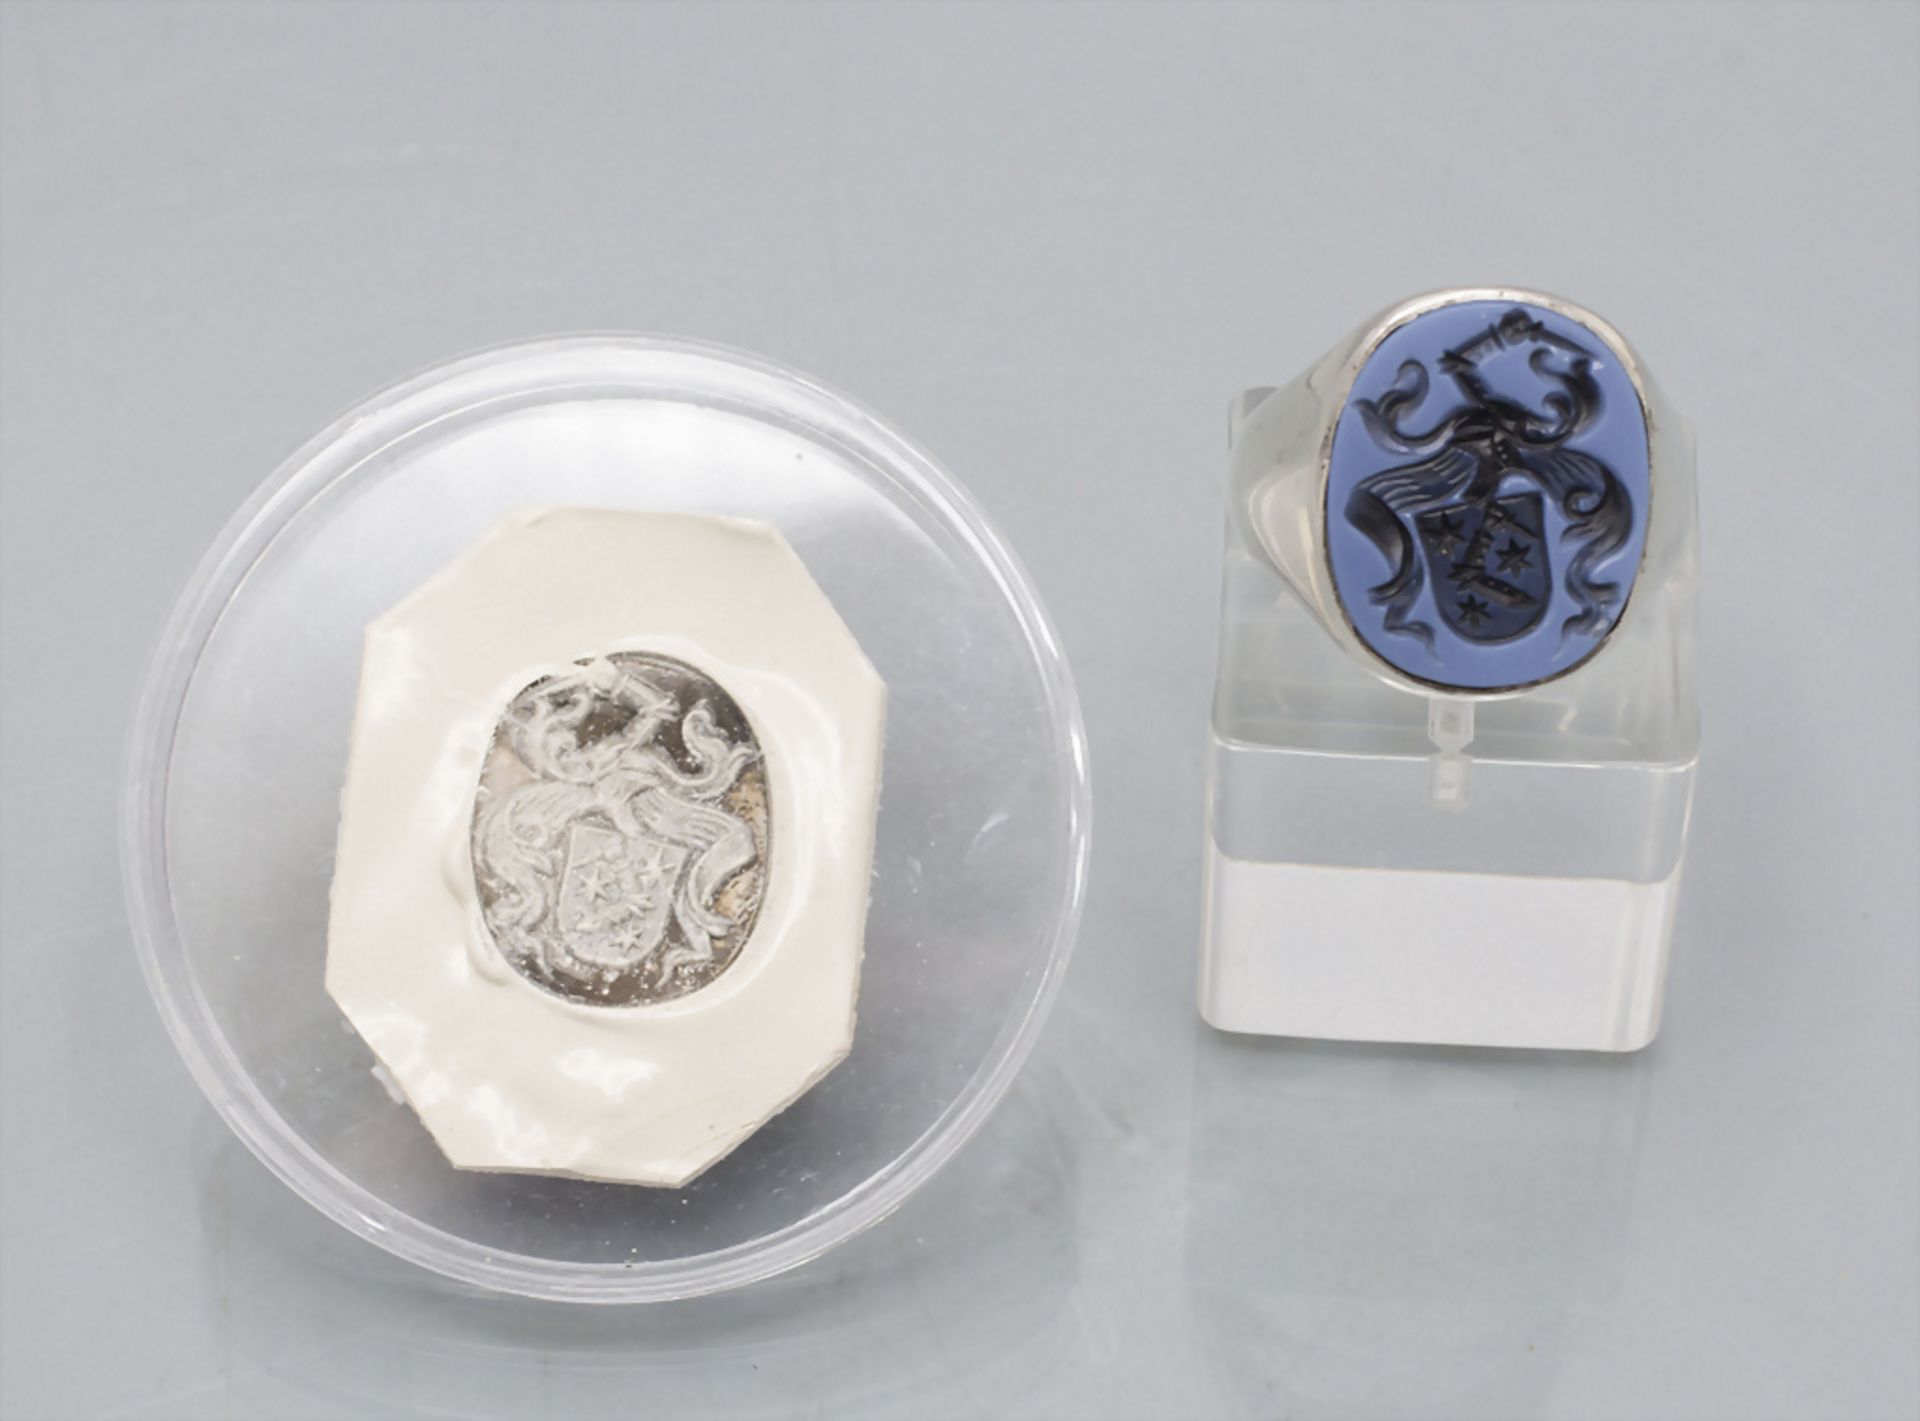 Siegelring / A silver seal ring, 20. Jh. - Image 2 of 4